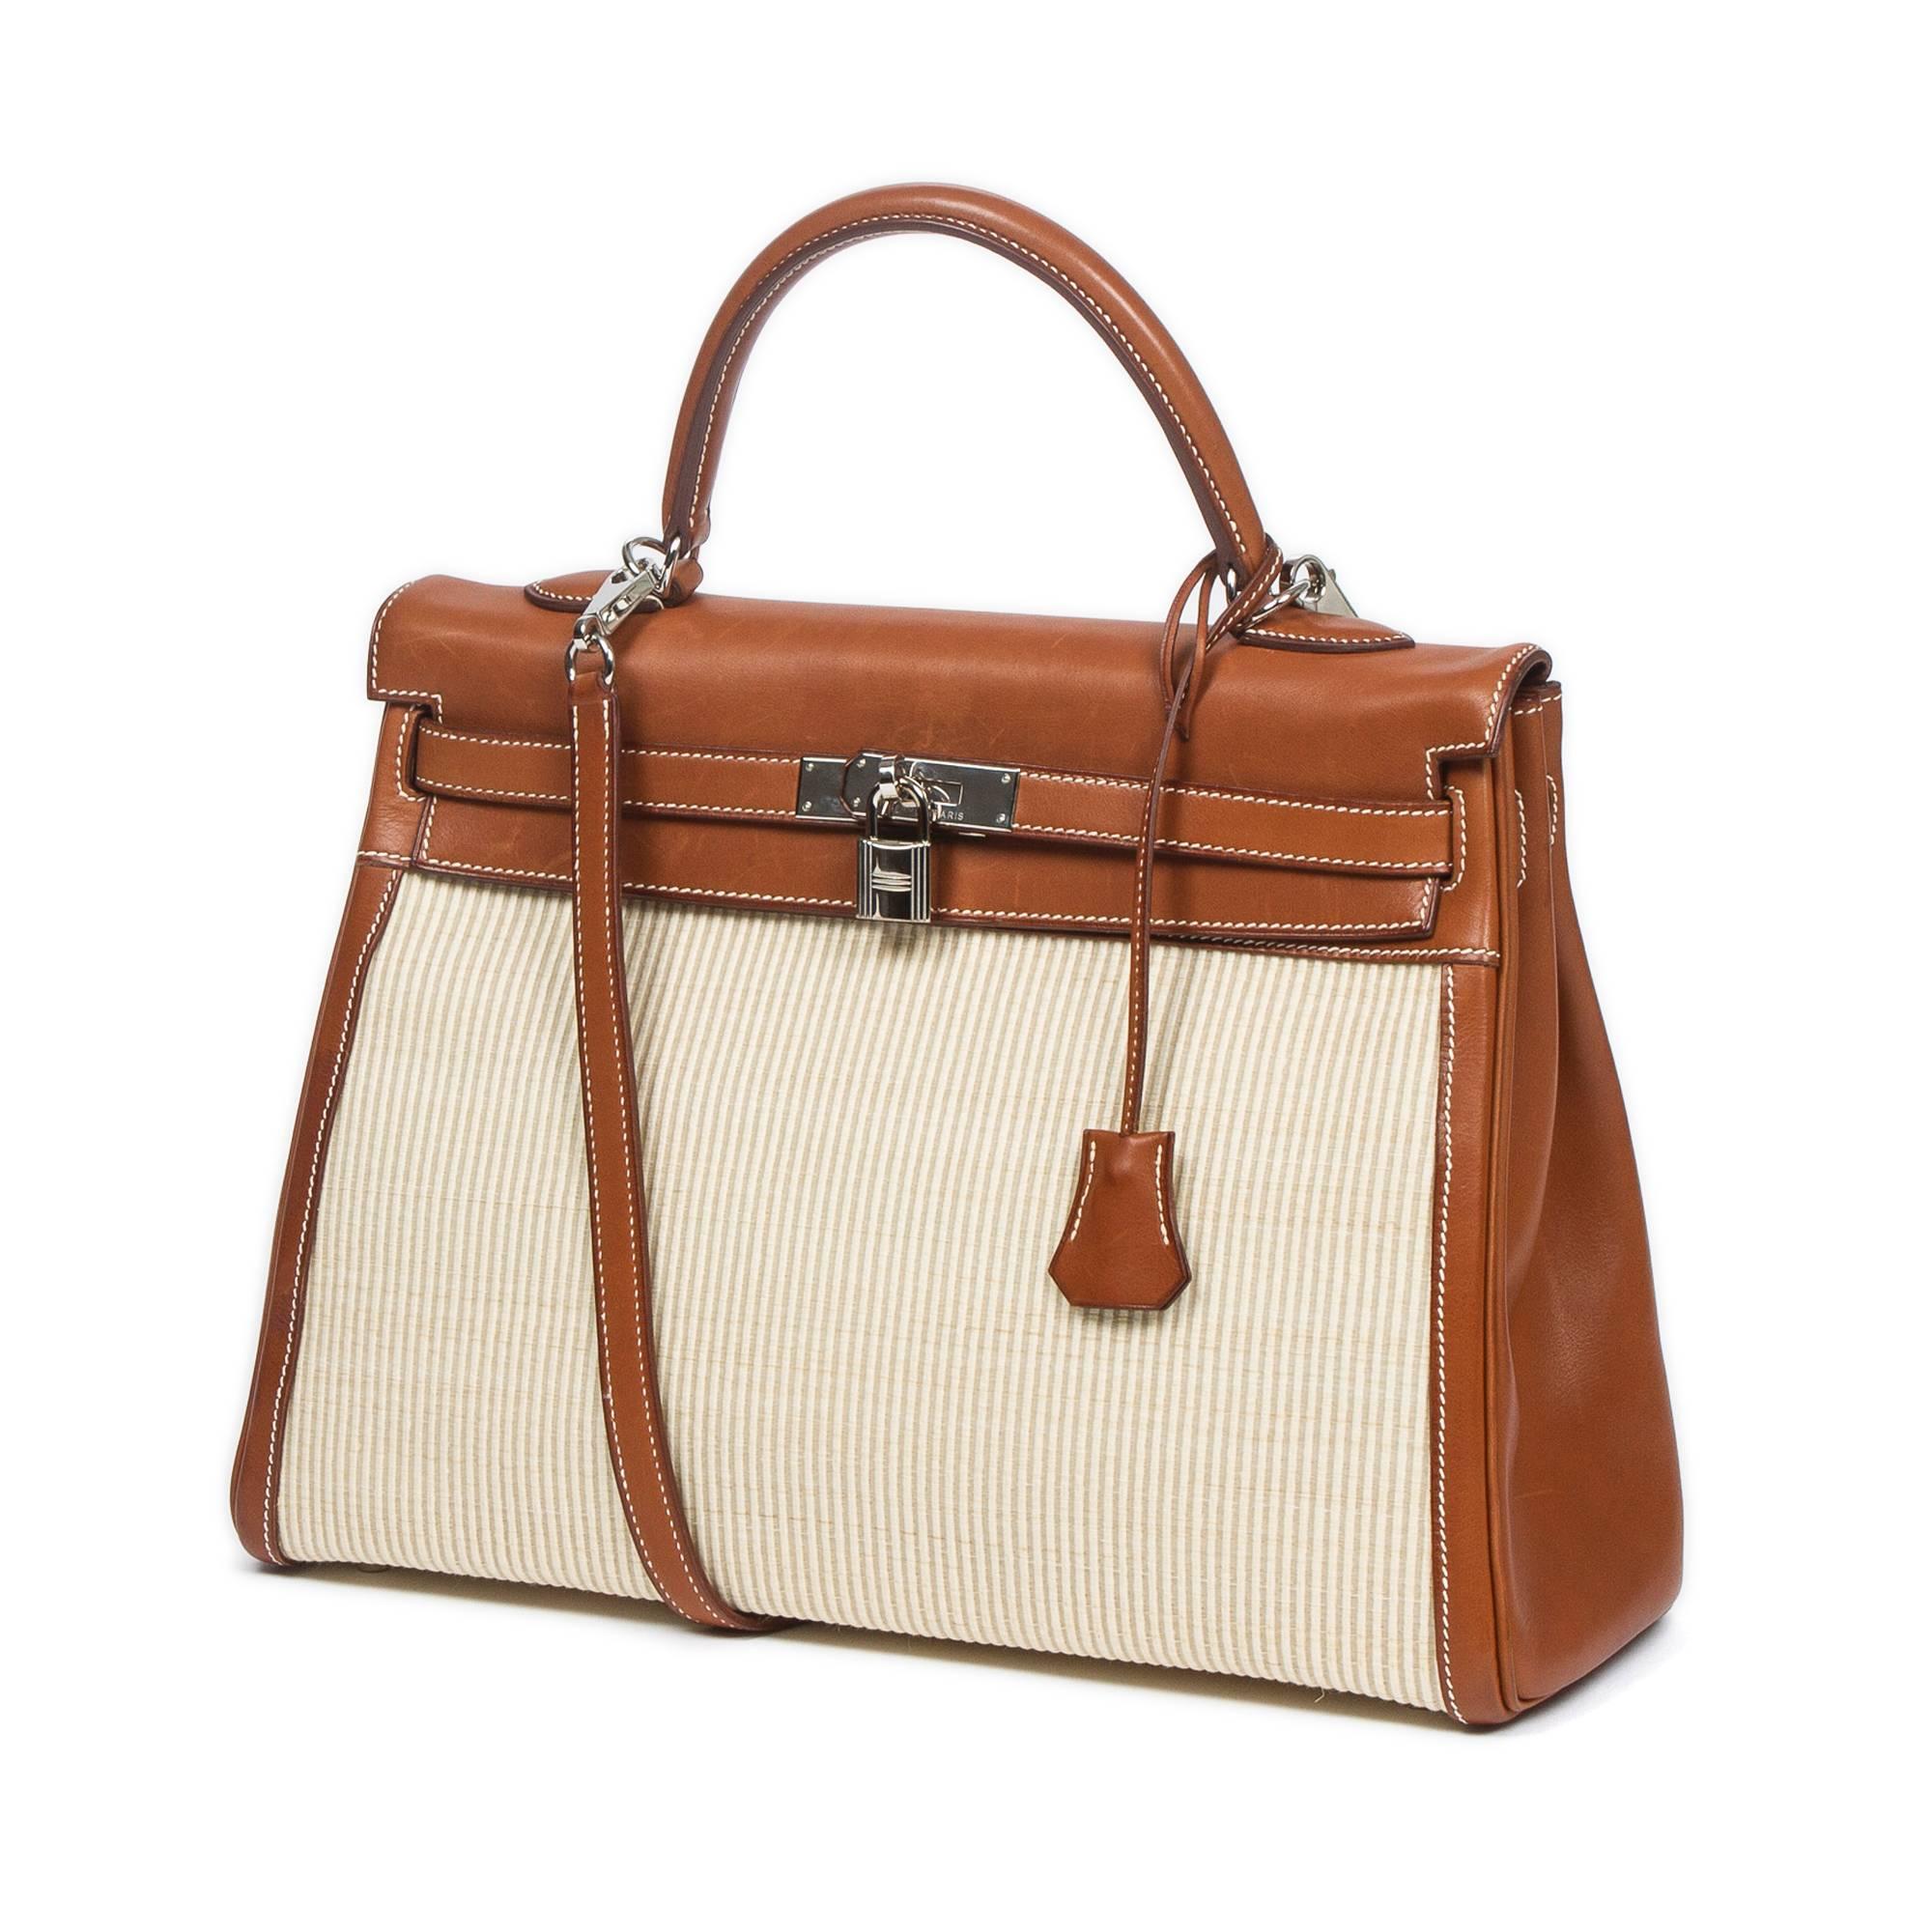 Kelly Retourné 35 in off white crinoline with flap, handle and details in barenia leather. Constrasting white stitchings and silver tone hardware. Barenia leather shoulder strap with cadenas and keys in clochette. Beige chevron canvas lined